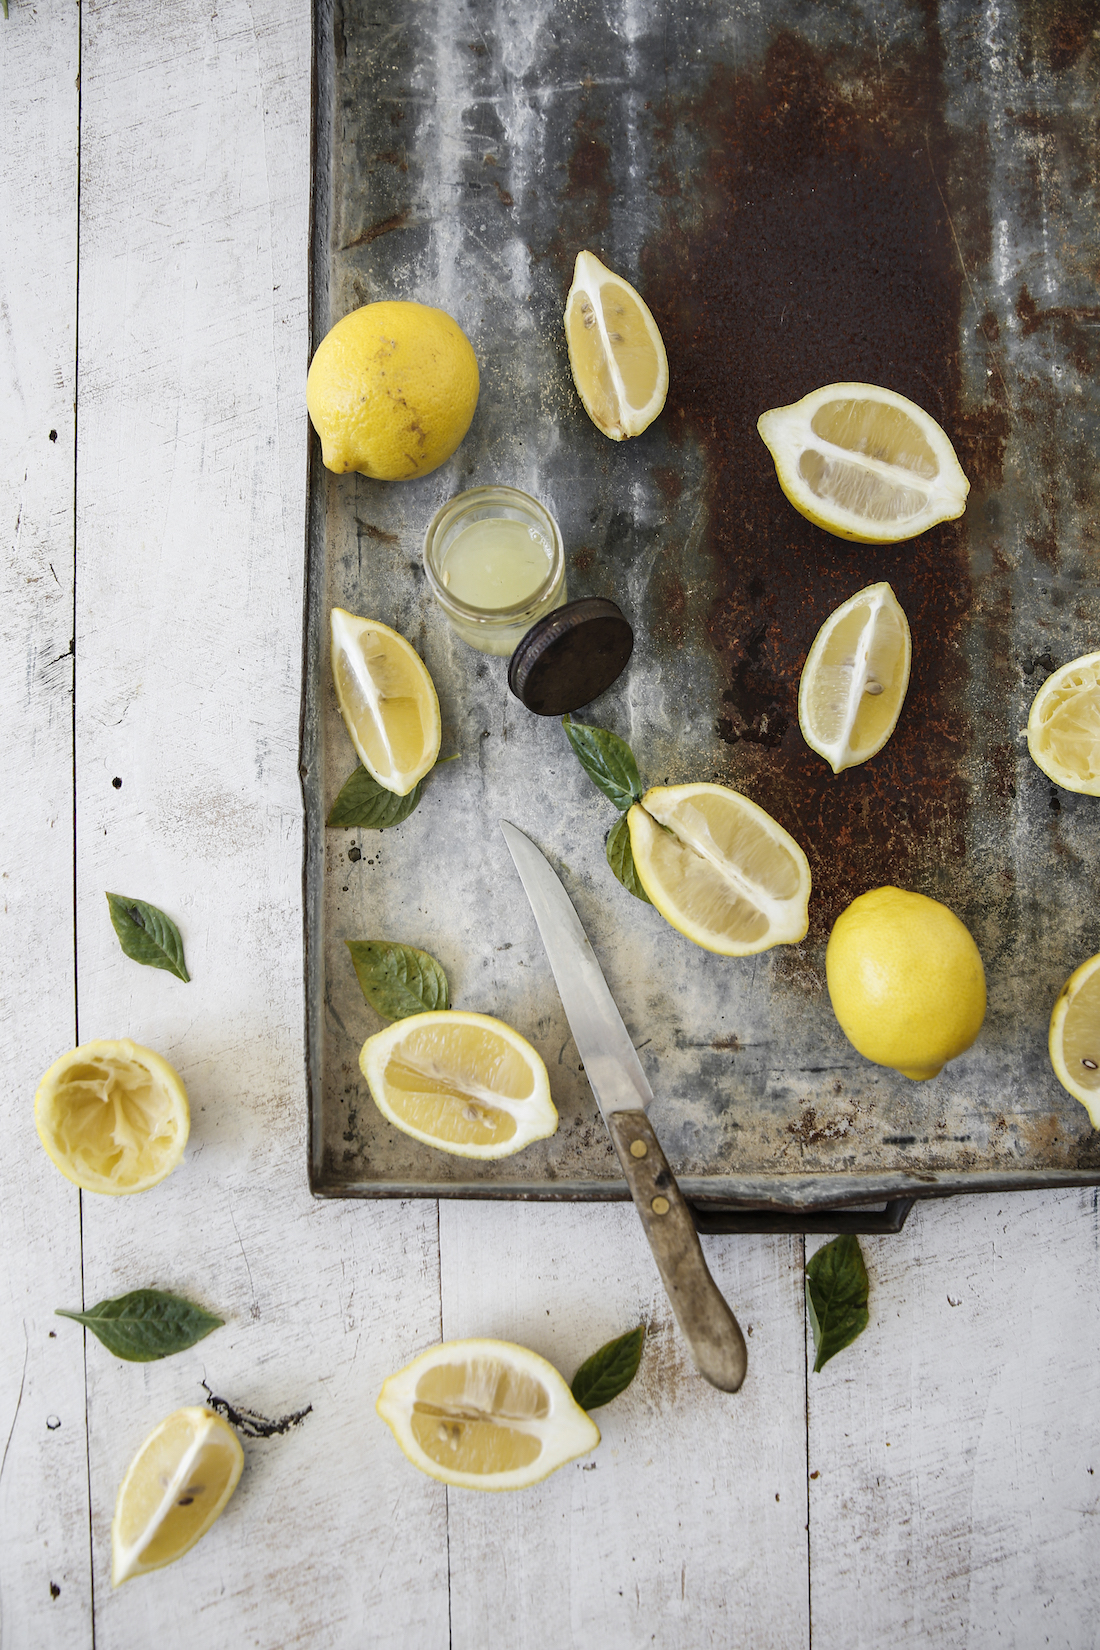 Lemons! On salads &amp; in hot or chilled water. A Vitamin C hit is good for your gut, your skin &amp; general wellbeing. 